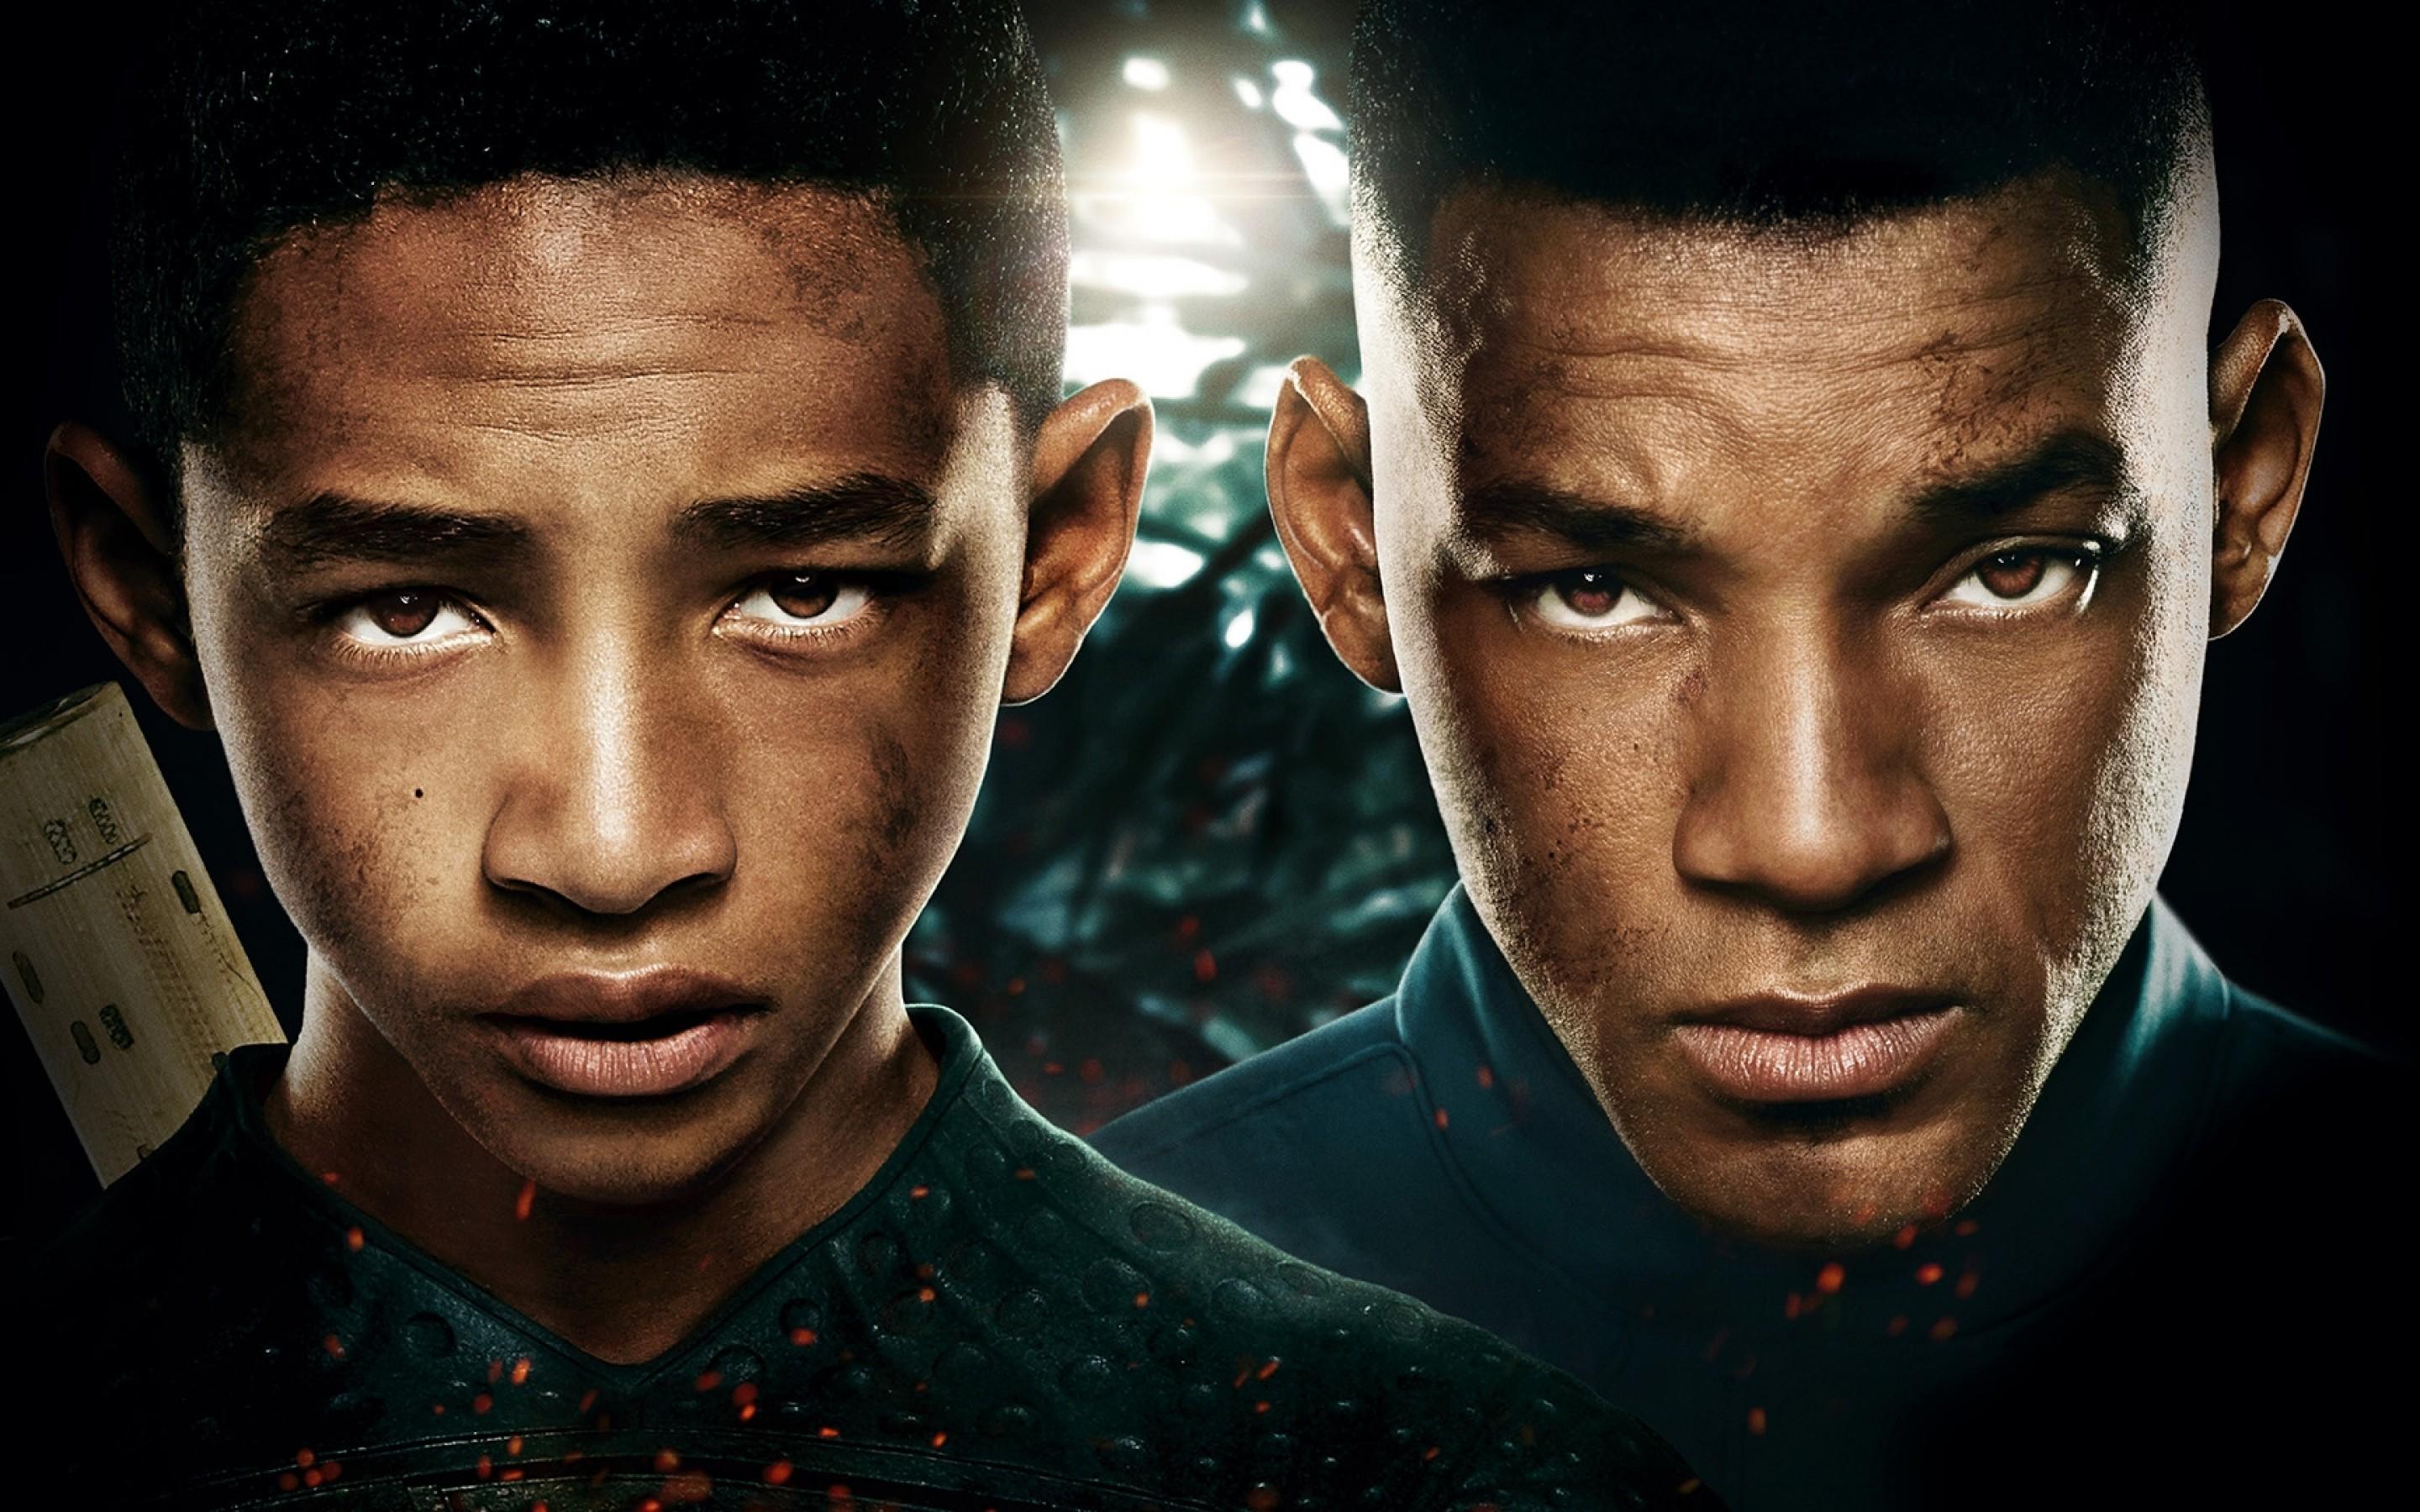 Download 2880x1800 Will Smith, Jaden Smith, After Earth Wallpaper